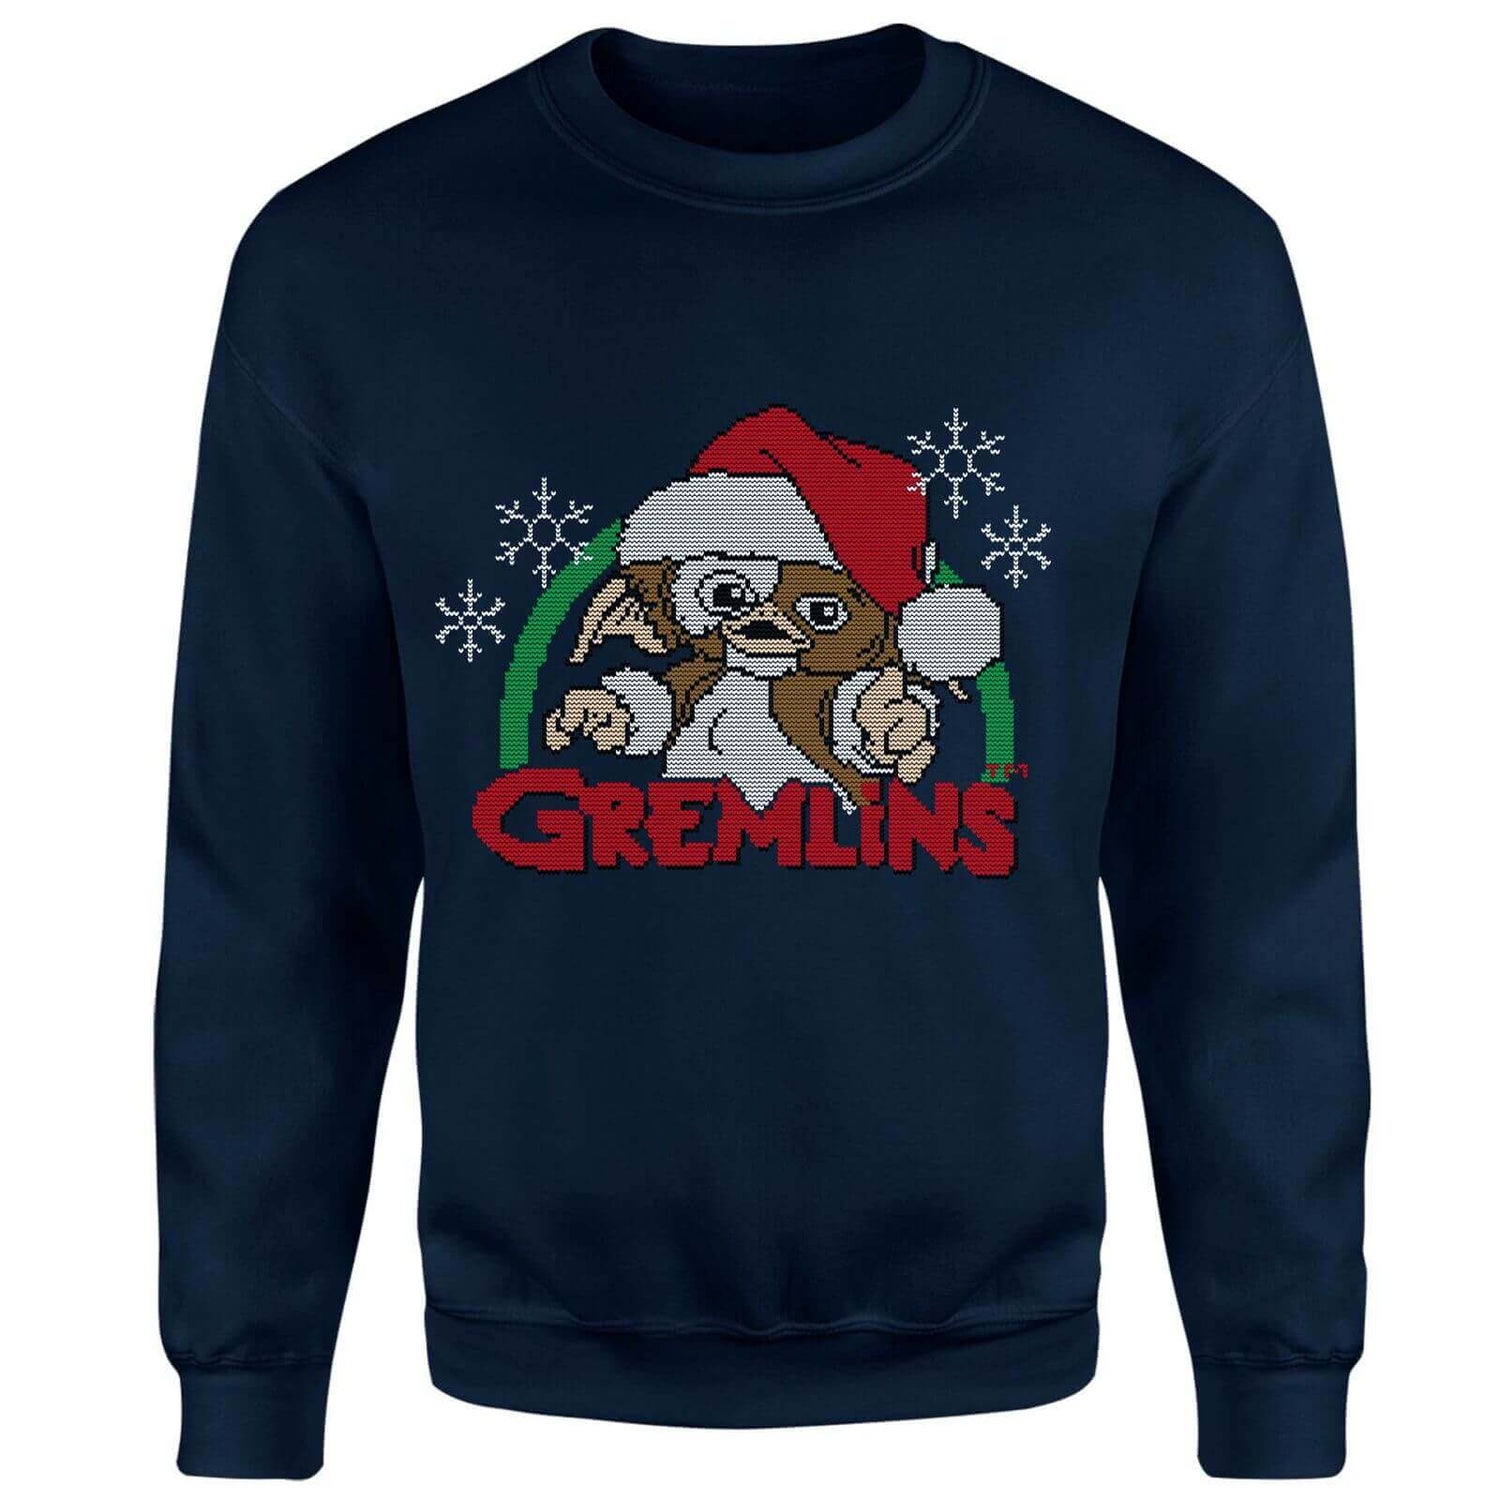 Gremlins Another Reason To Hate Christmas Jumper - Navy